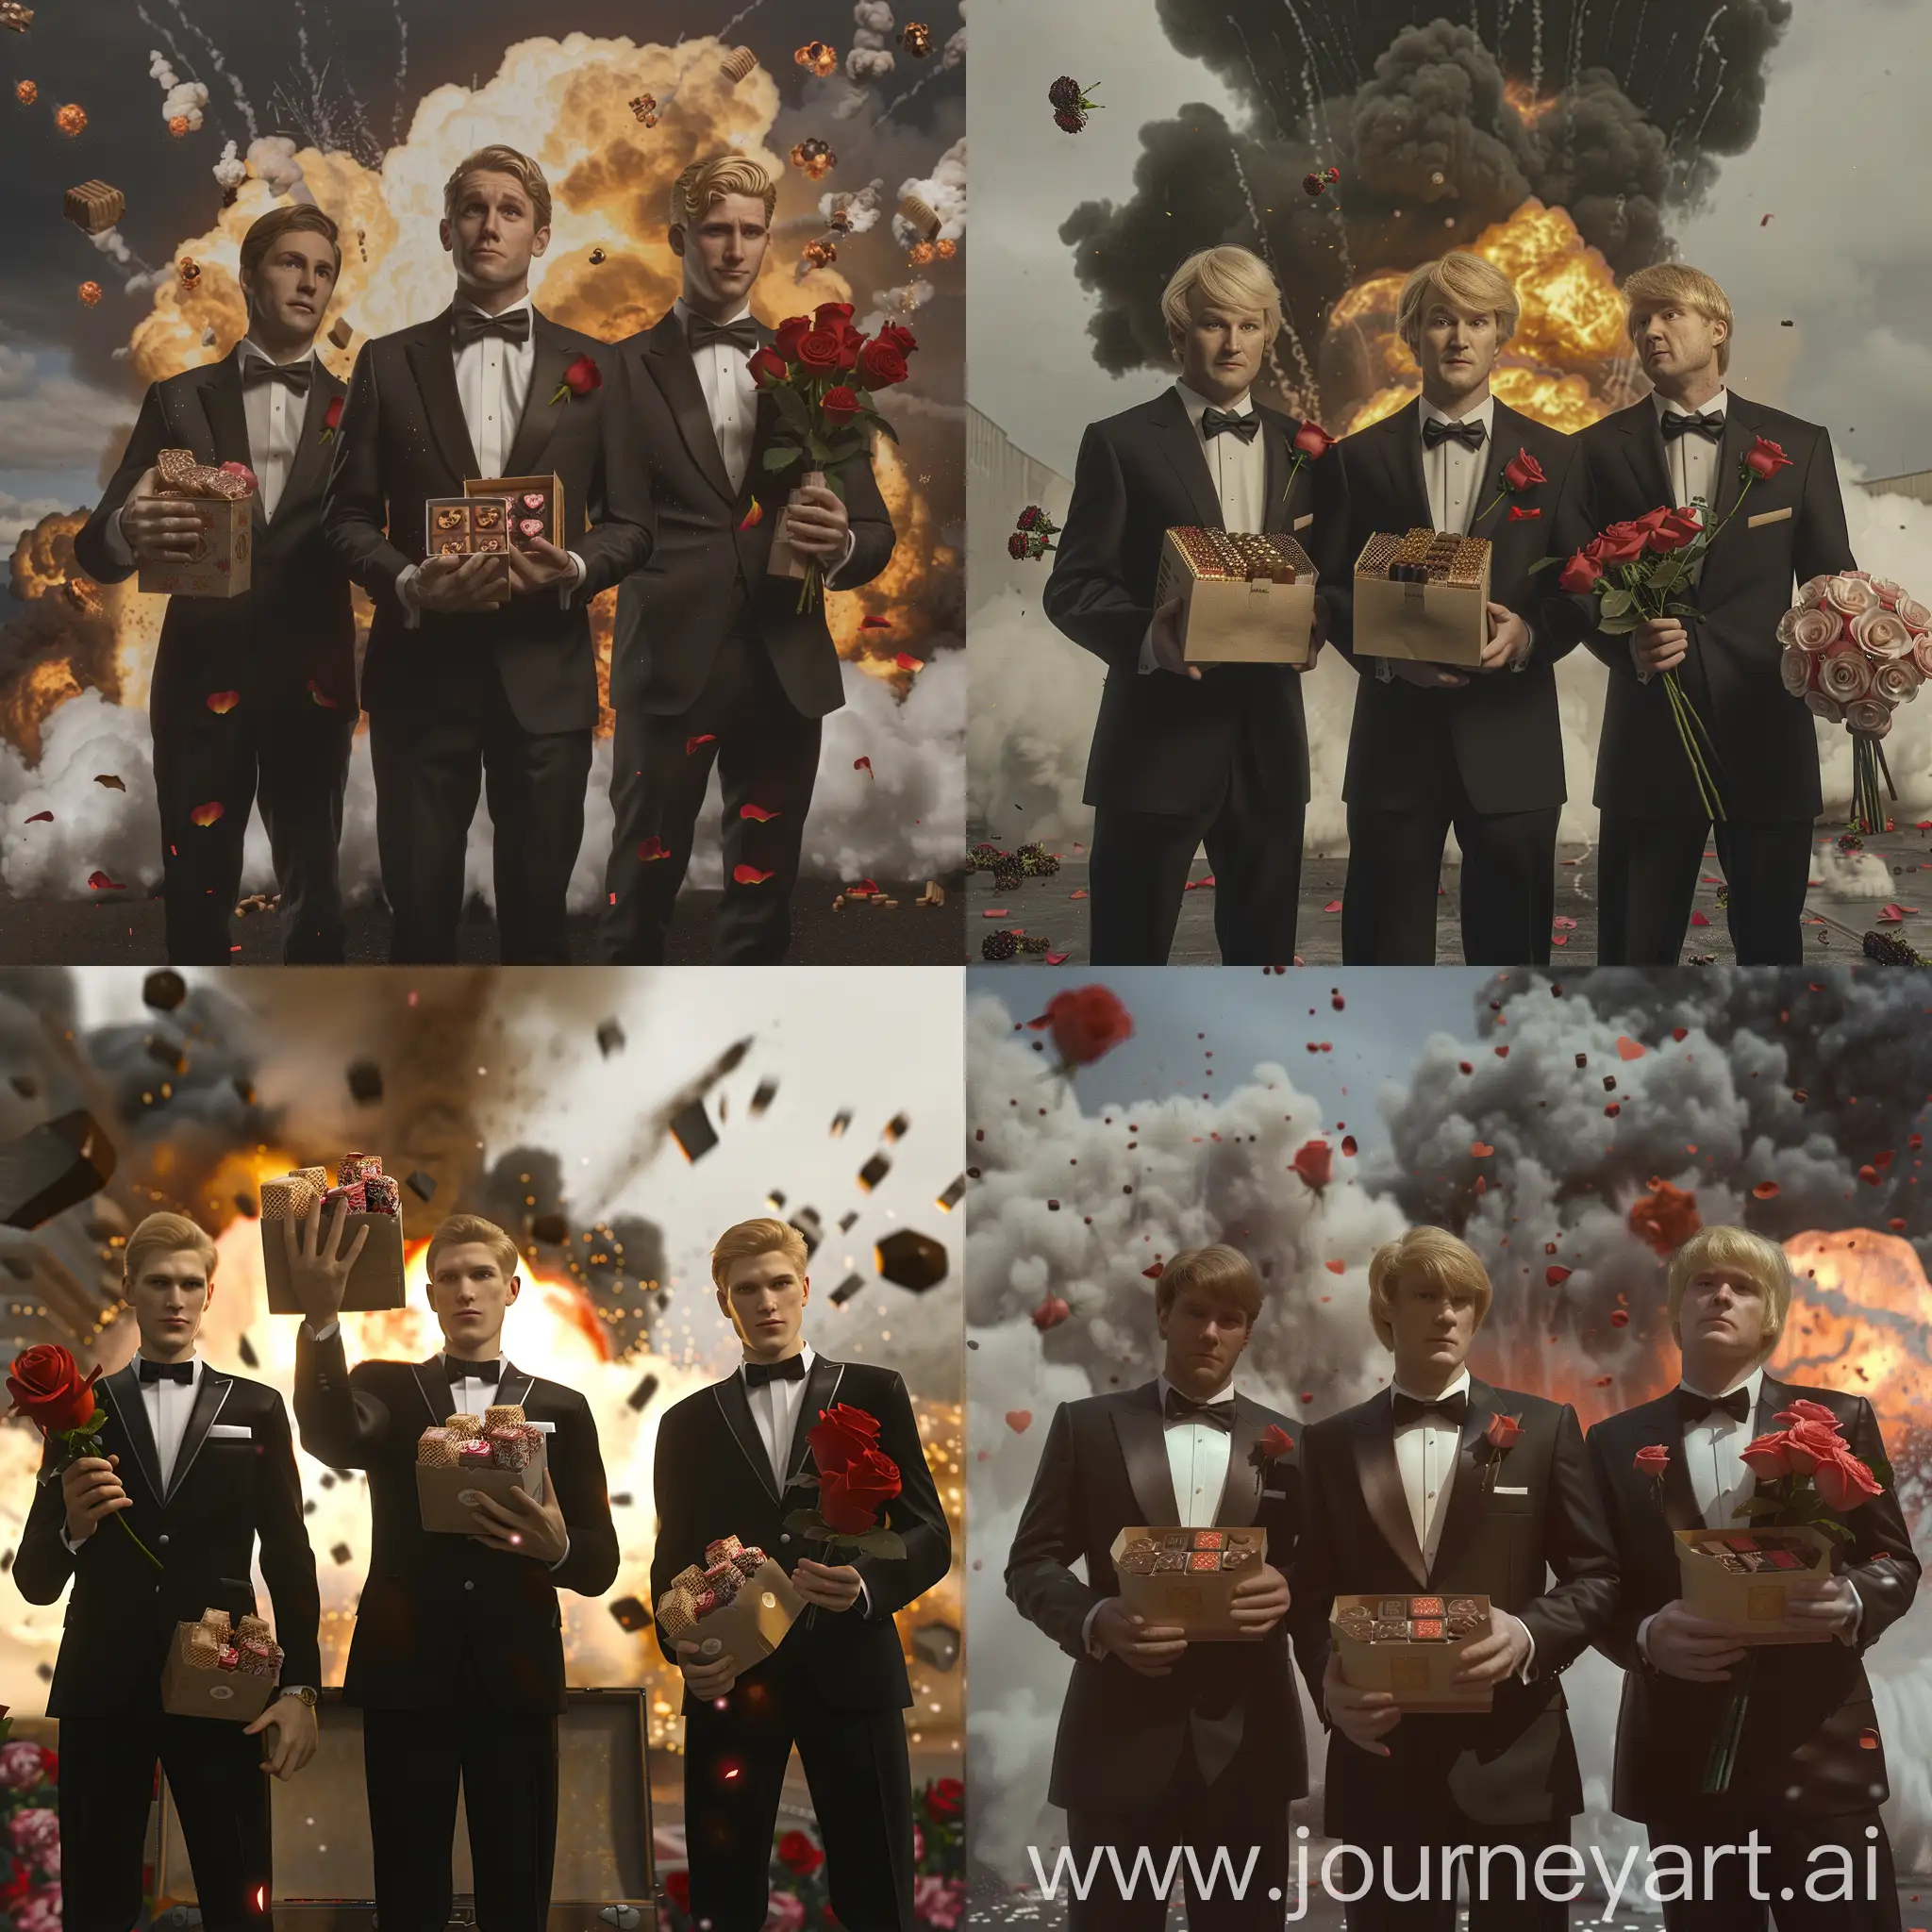 As an explosion rages in the background, three men in tuxedos stand tall and confident. In their hands, they hold roses and boxes of chocolates, a testament to their romantic nature even in the face of danger. The man on the right has a blonde hair, men on the left and in the centre are brunette, adds a touch of charm to the scene. Photorealistic 4k, HDR, high resolution